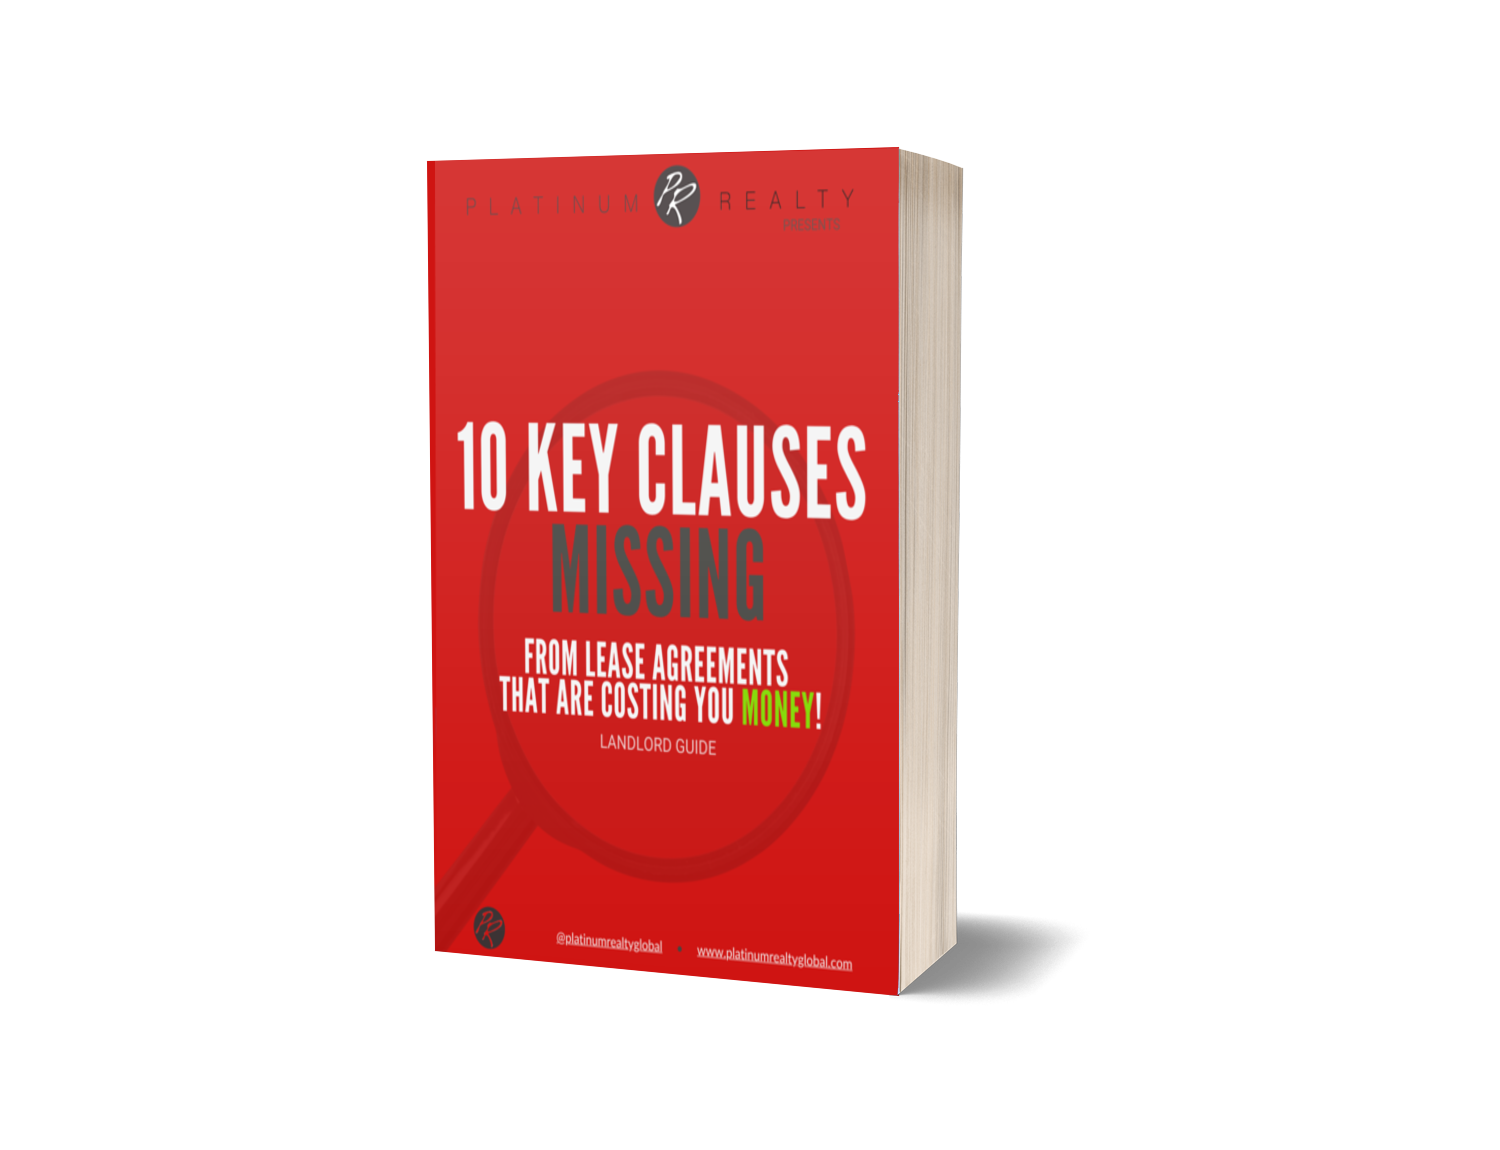 [LANDLORDS] 10 Key Clauses Missing From Lease Agreements